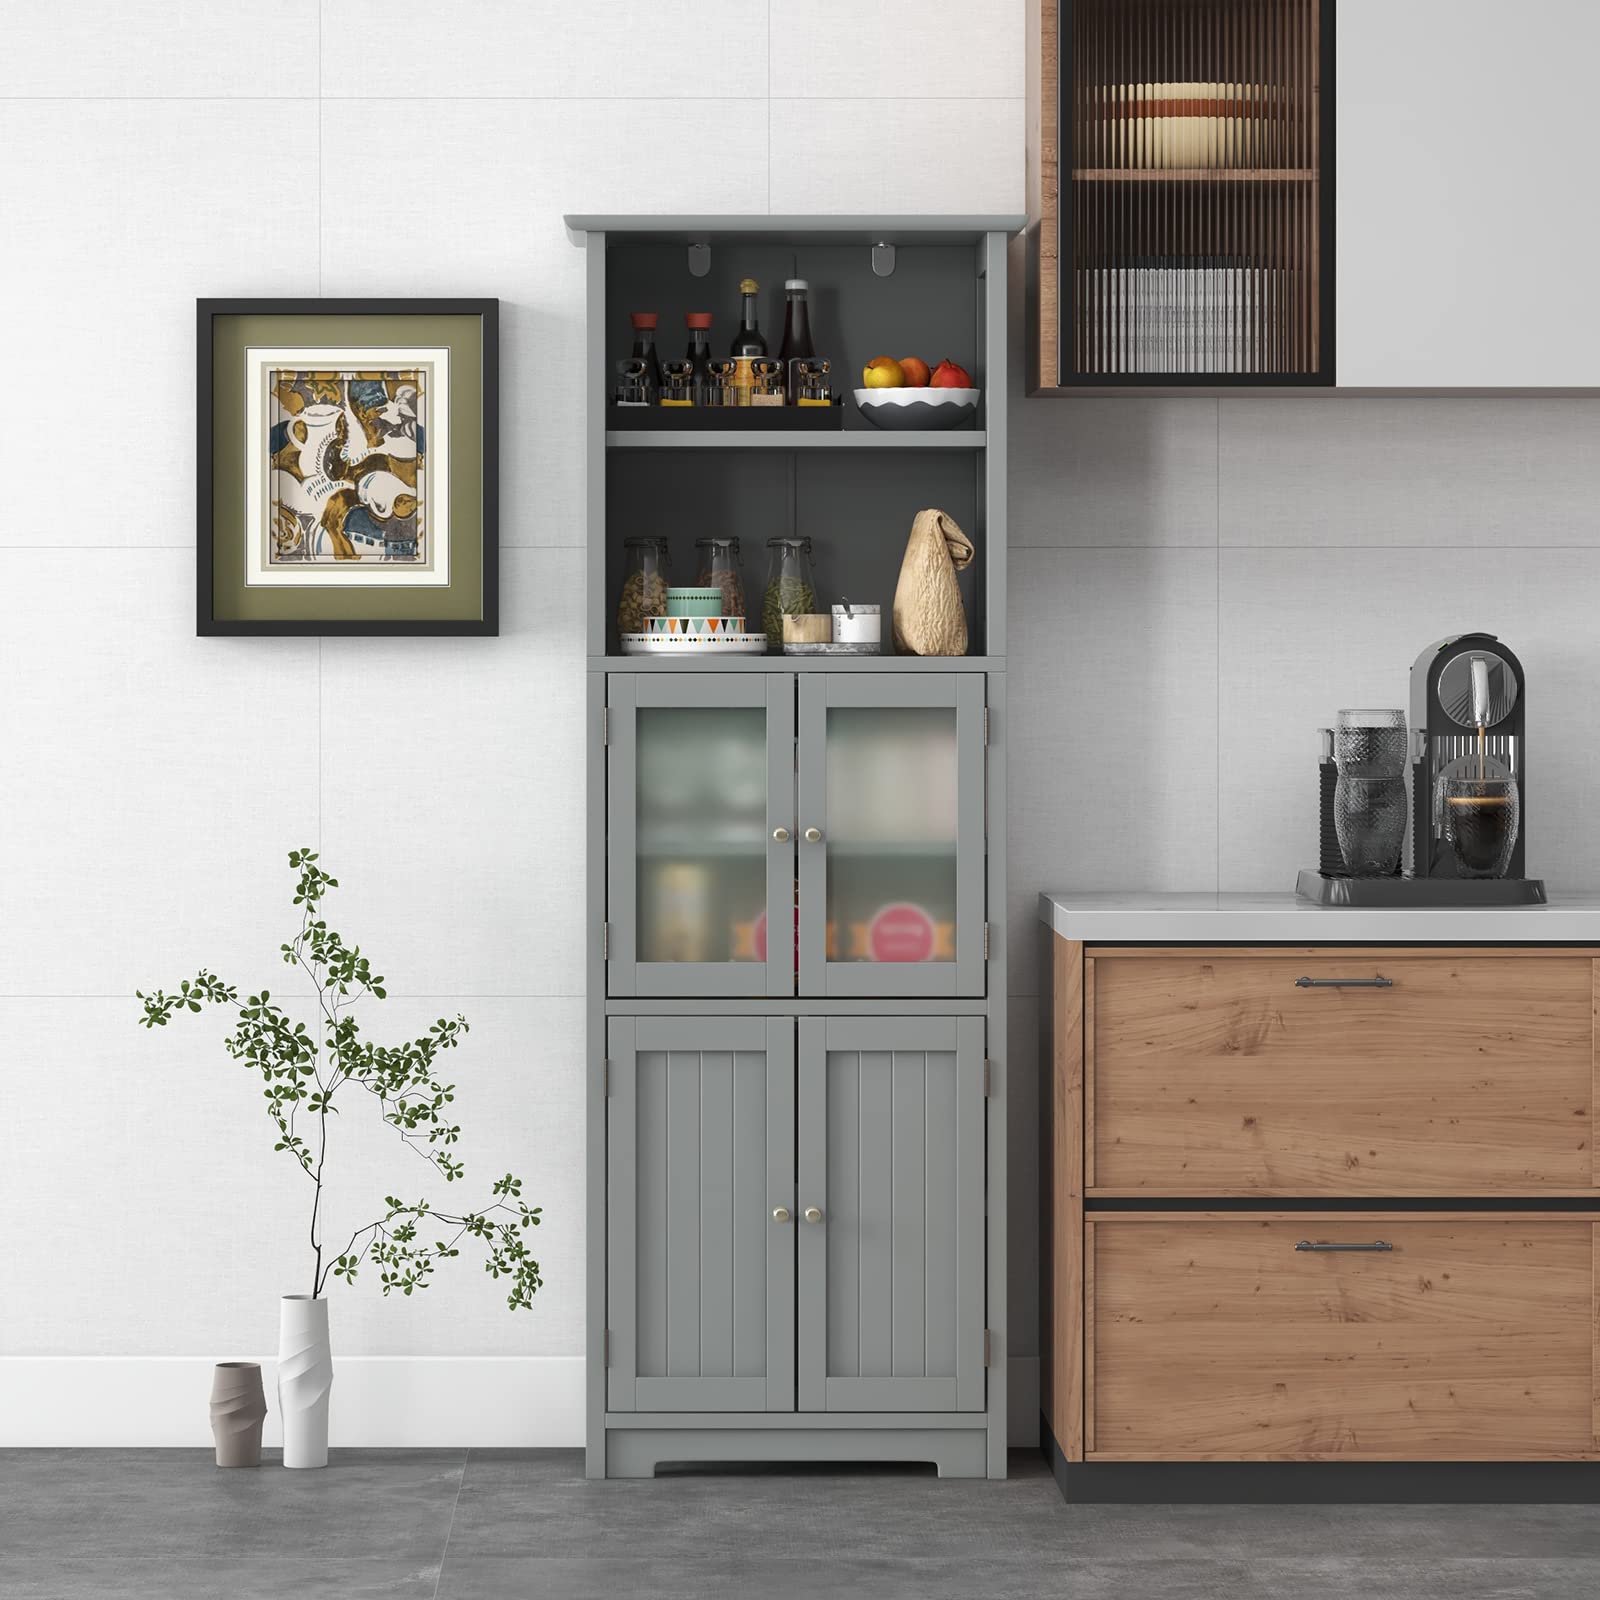 Giantex 64" Tall Bathroom Storage Cabinet, Freestanding Kitchen Pantry Cupboard with 2 Cabinets